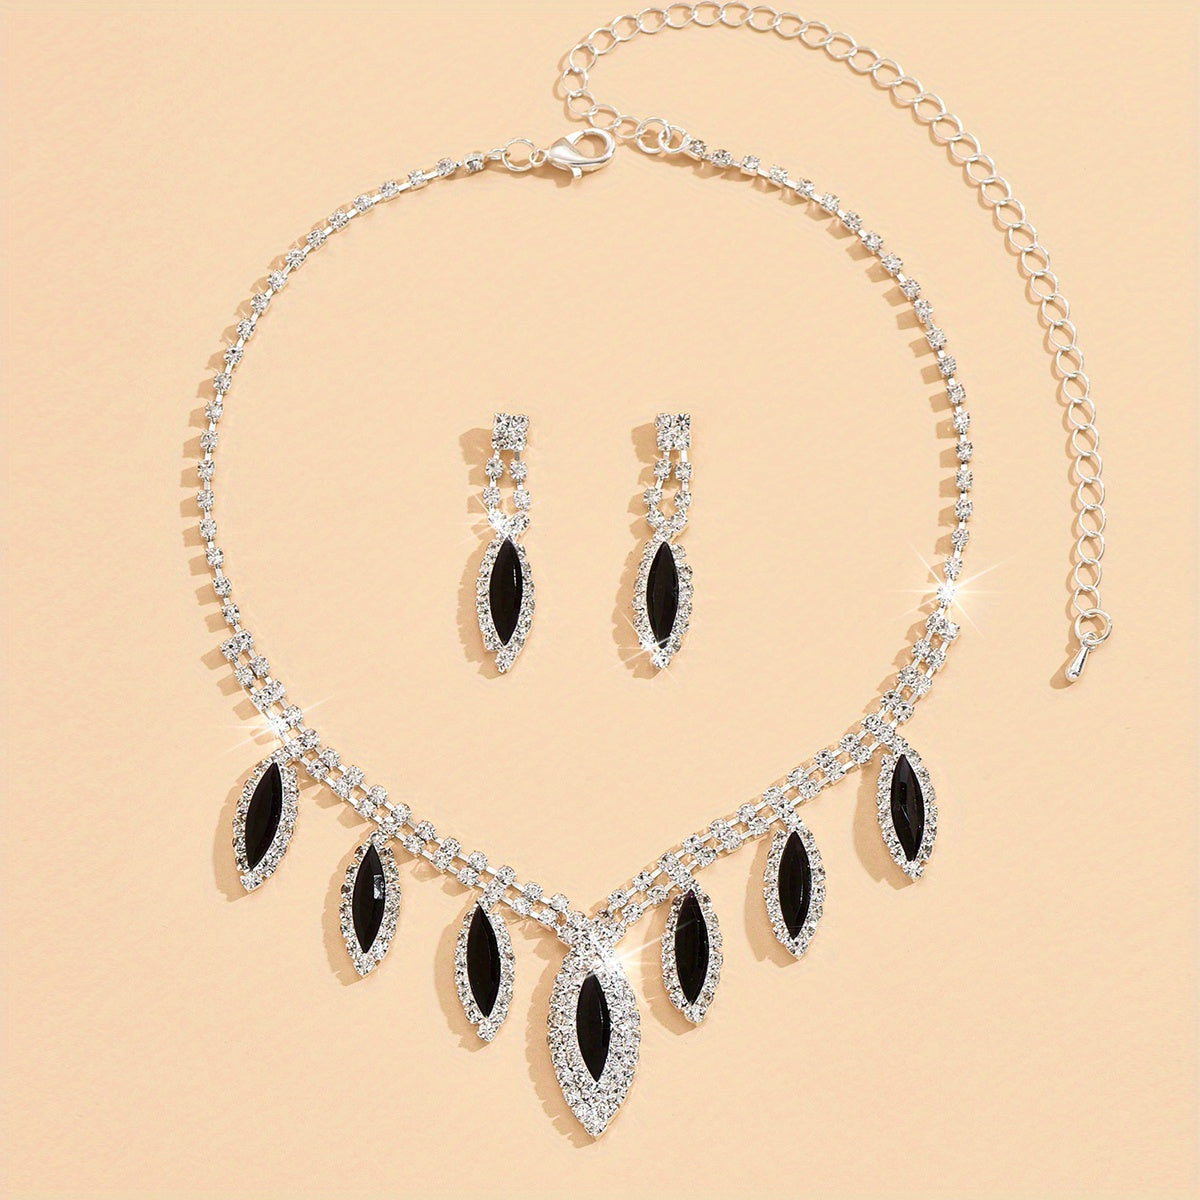 3pcs Earrings Plus Necklace Elegant Jewelry Set Silver Plated Inlaid Rhinestone Trendy Oval Shape Match Evening Party Cocktail Party Outfits